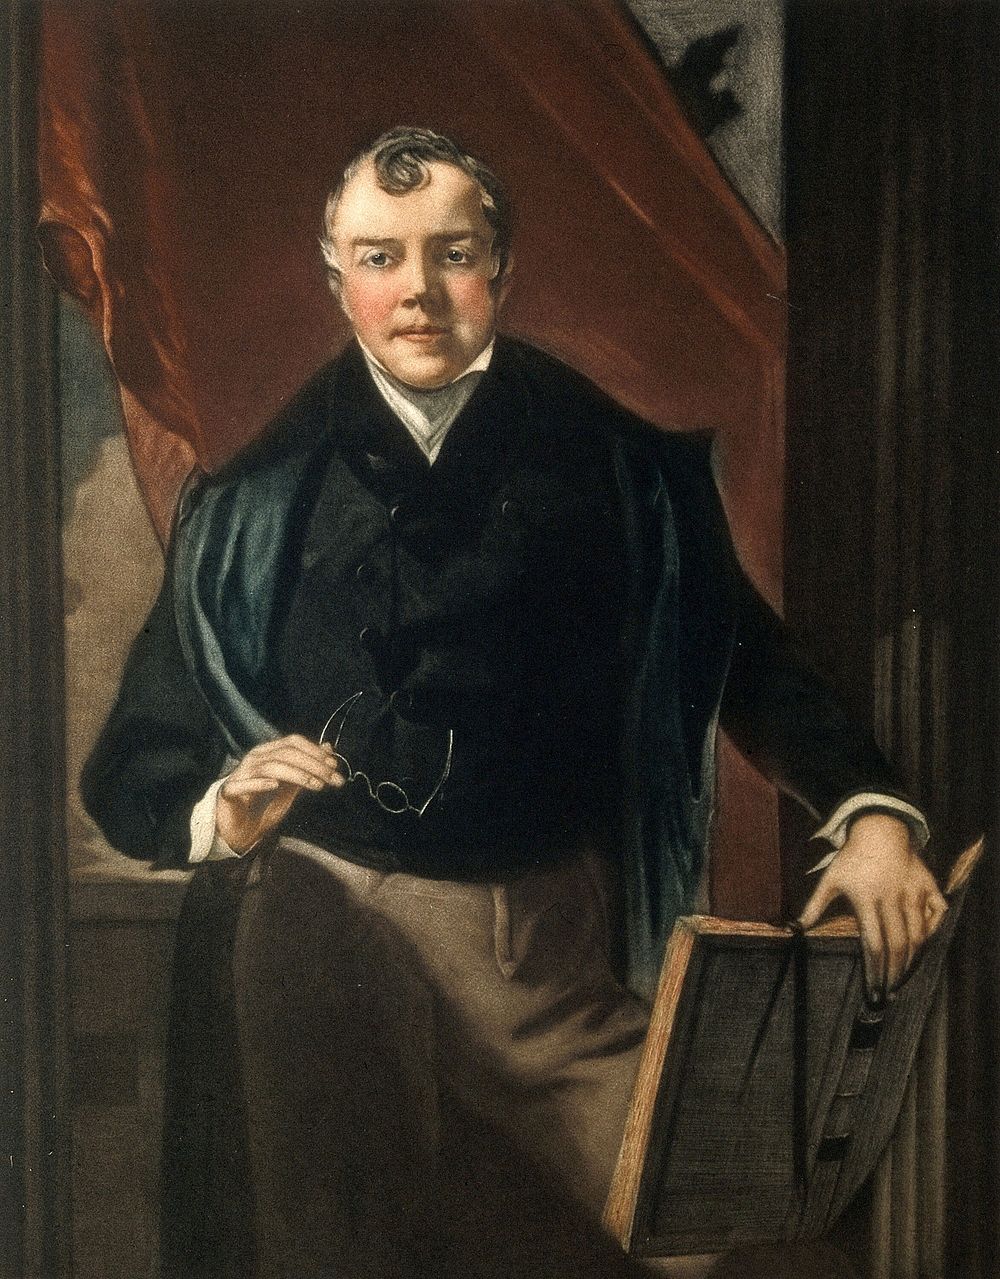 Charles Bell. Colour mezzotint by H. Goffey after J. Stevens.